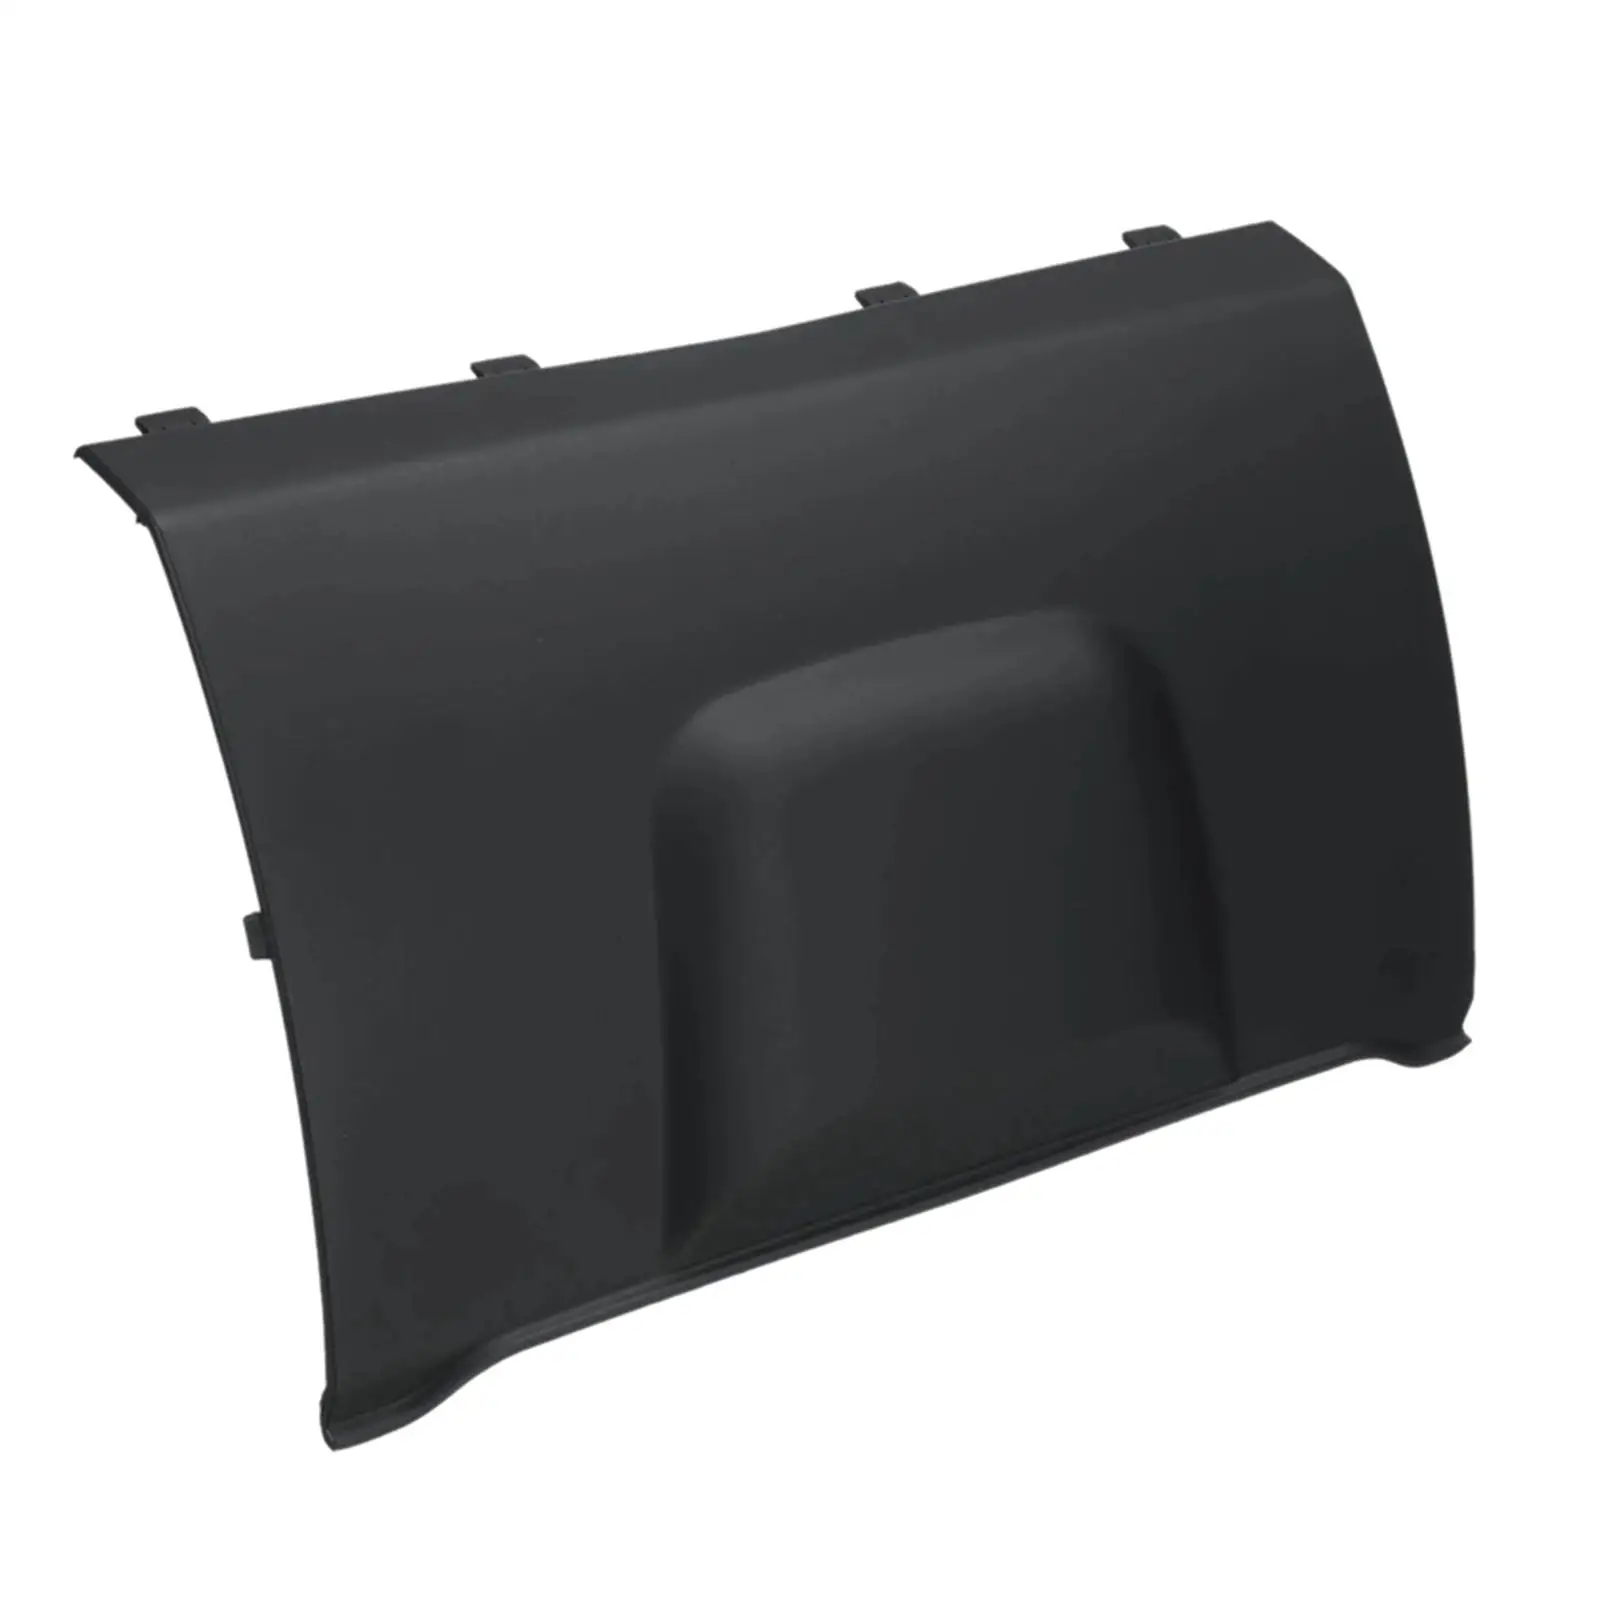 Rear Bumper Tow Cover Cap for Mercedes-benz 1998 to 2005 M Class W163